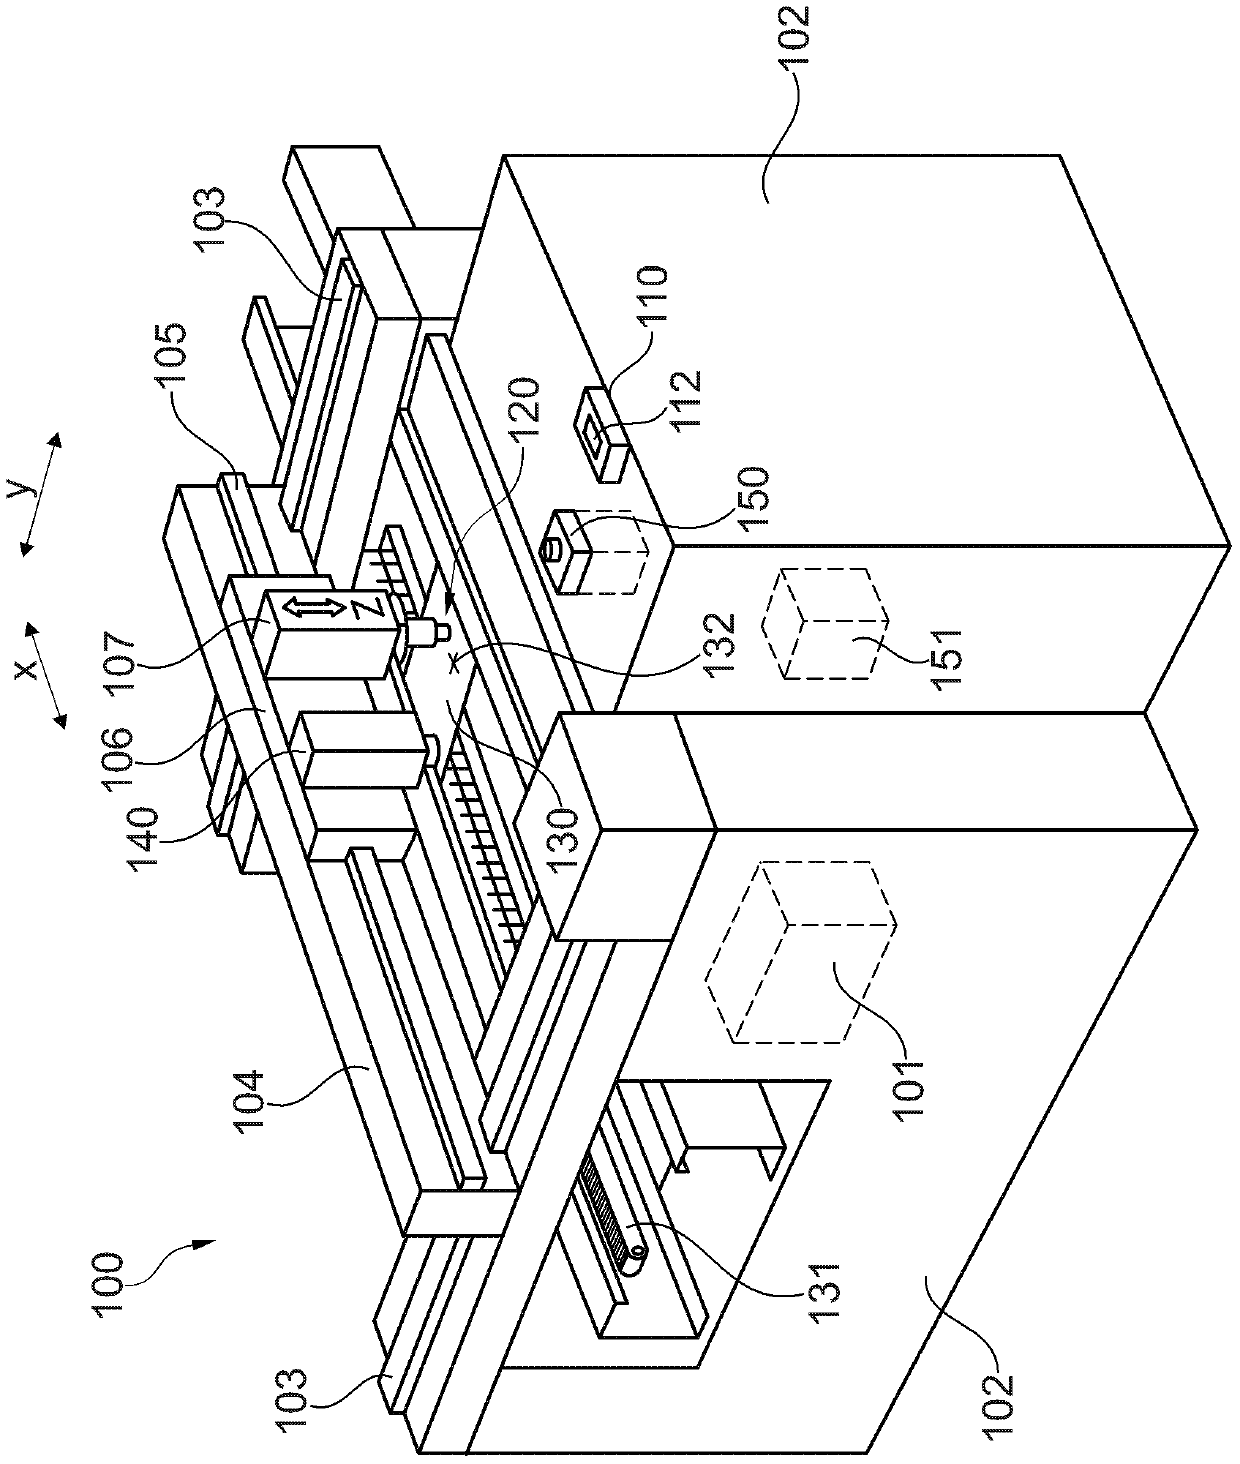 Method and device of assembling components, considering the relative spatial position ifnormation